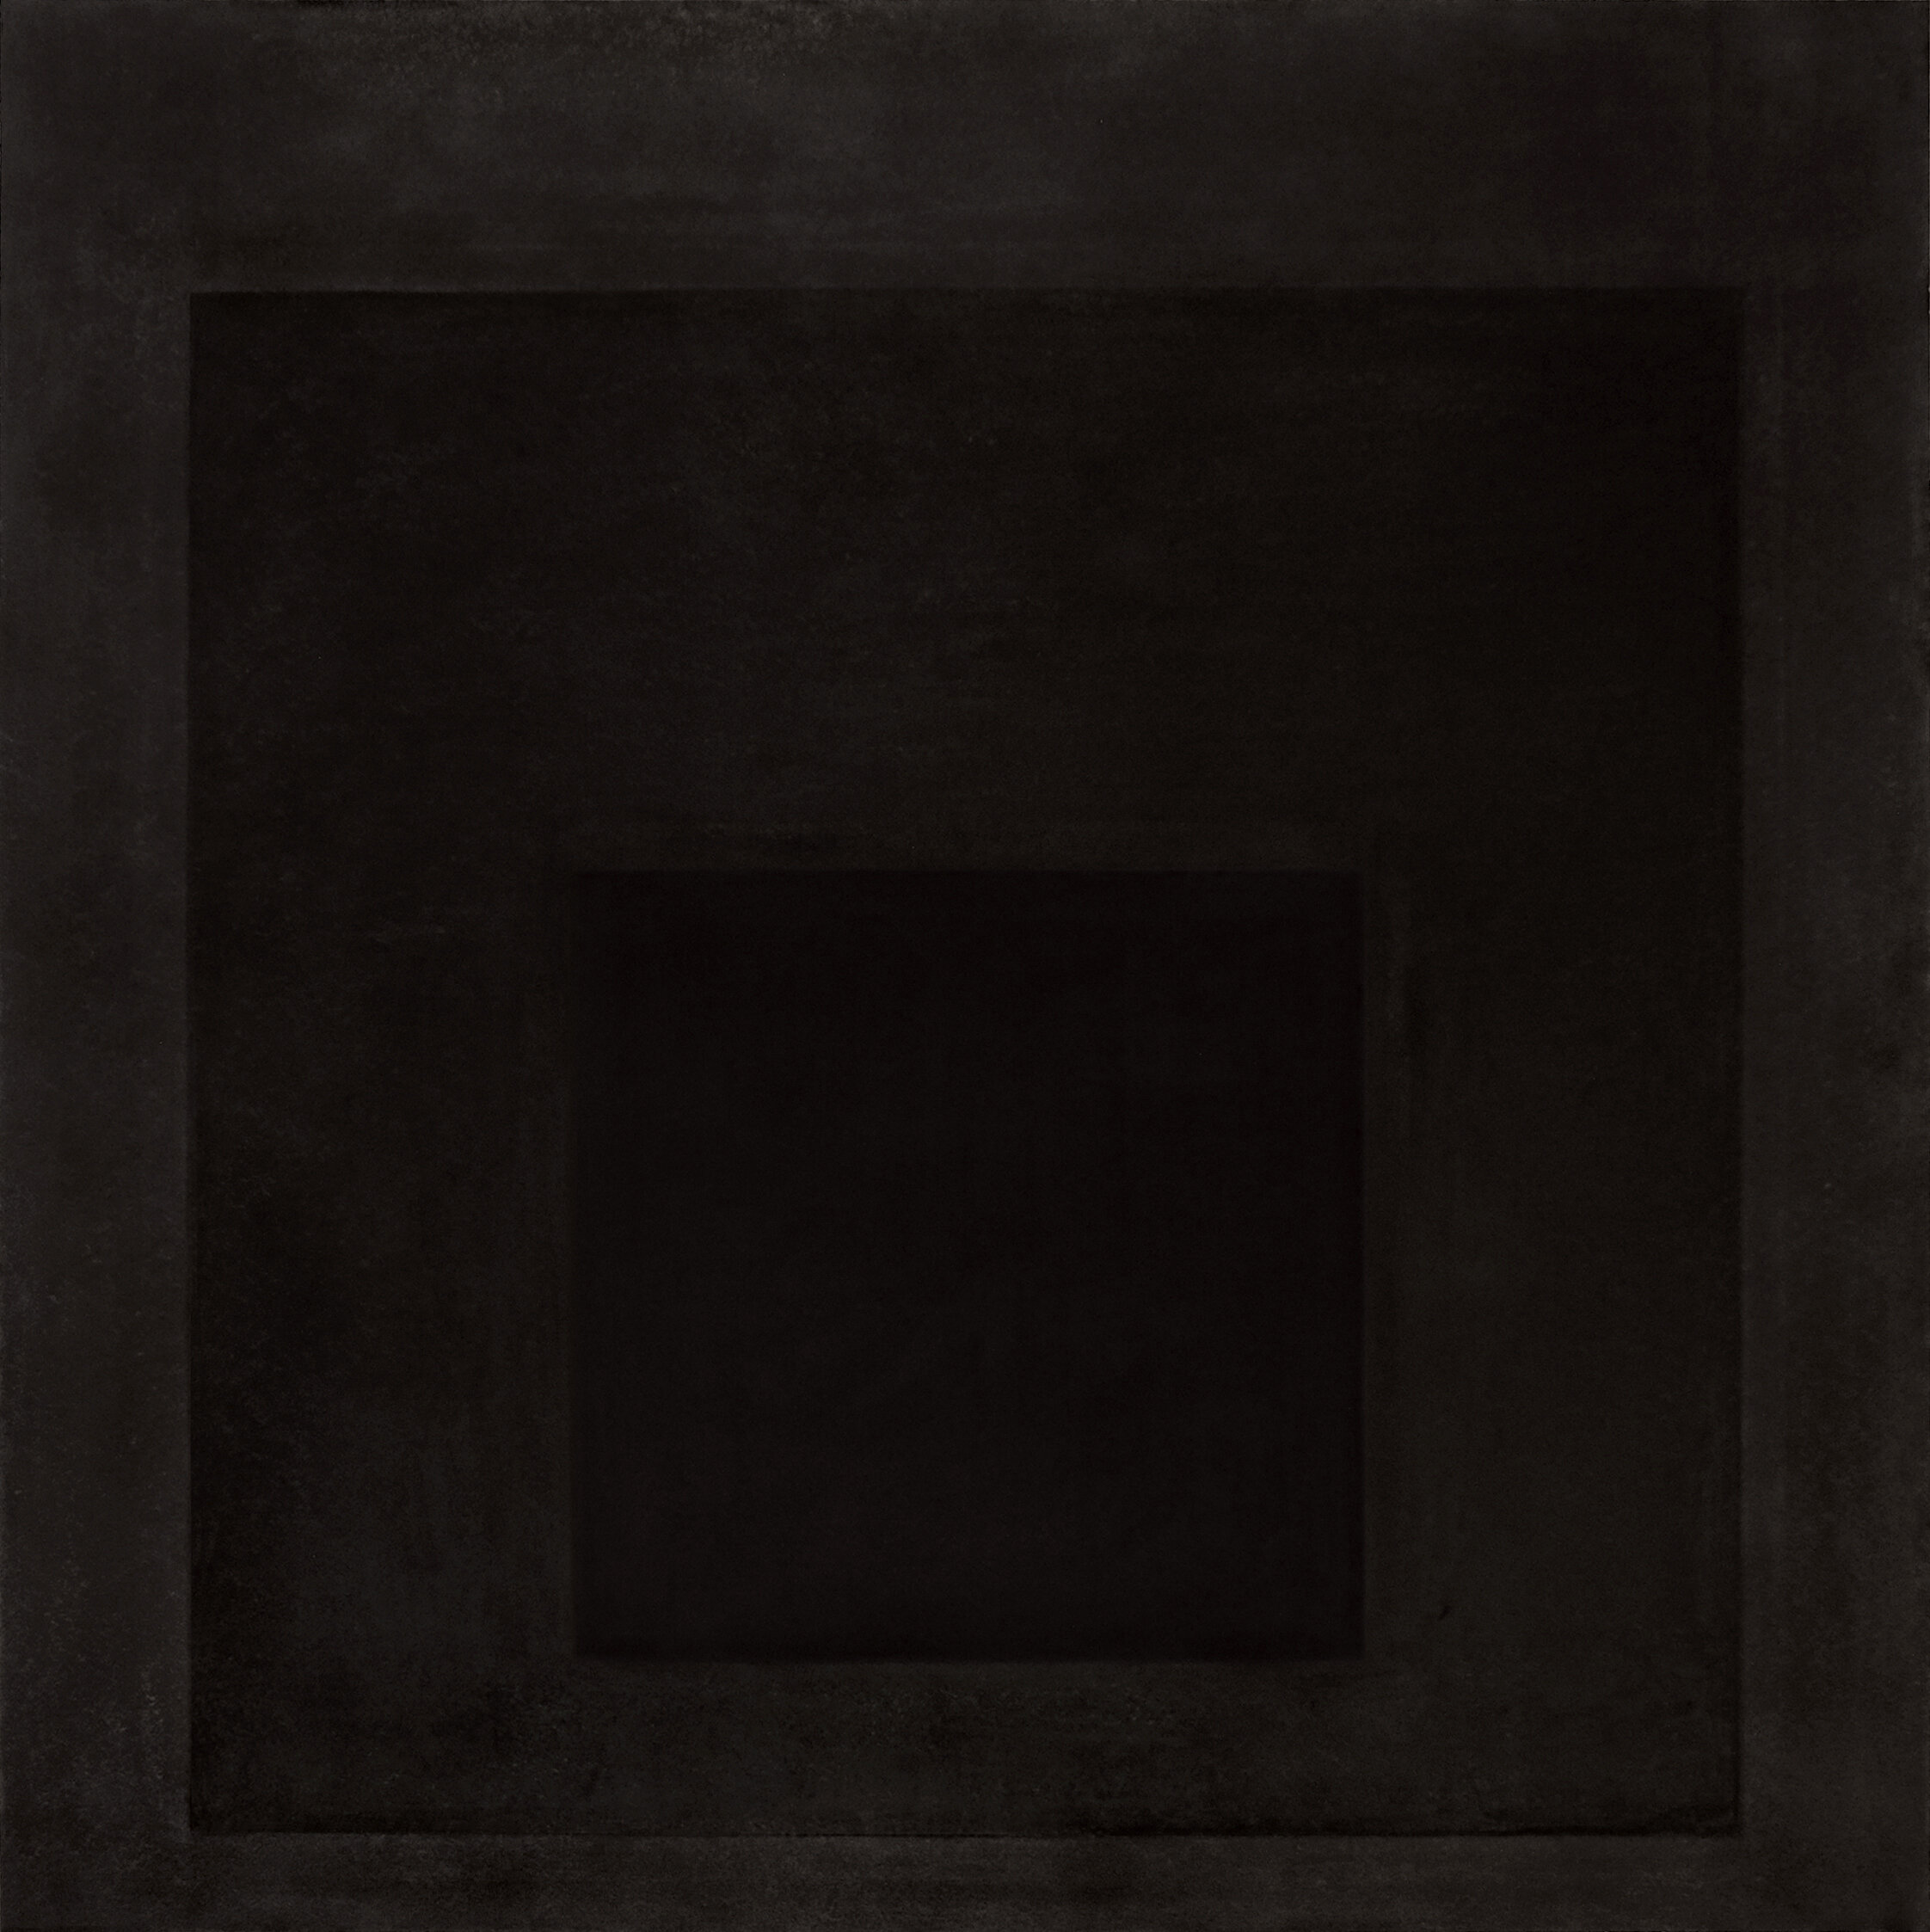 ‘Homage to the Square’ (A) (After Josef Albers) 1950 